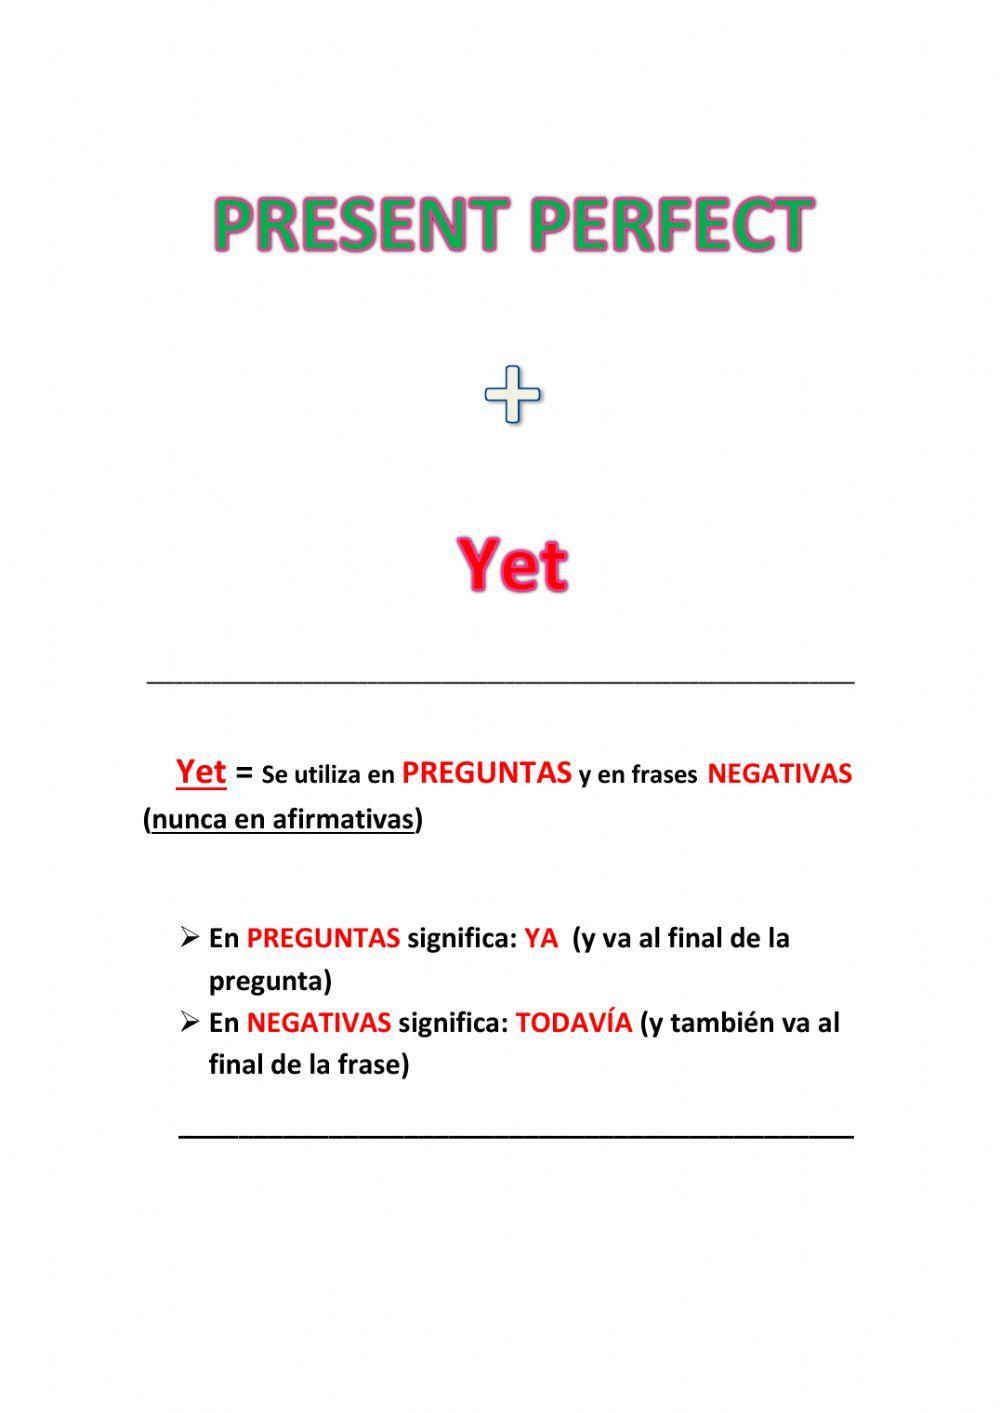 Present Perfect Simple with yet